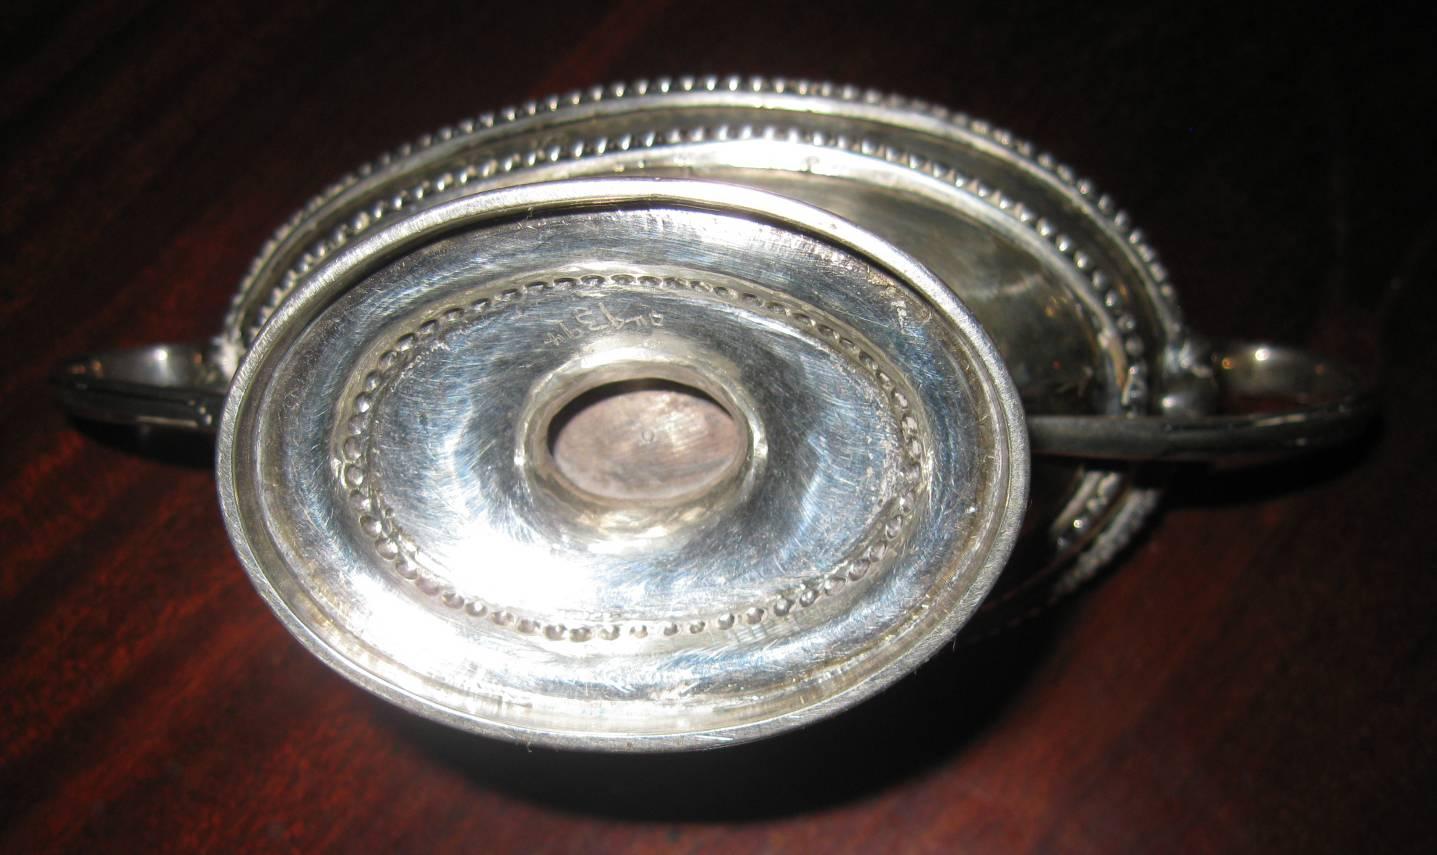 19th century English Sterling Silver Georgian Master Salts Virtute et Labore For Sale 1